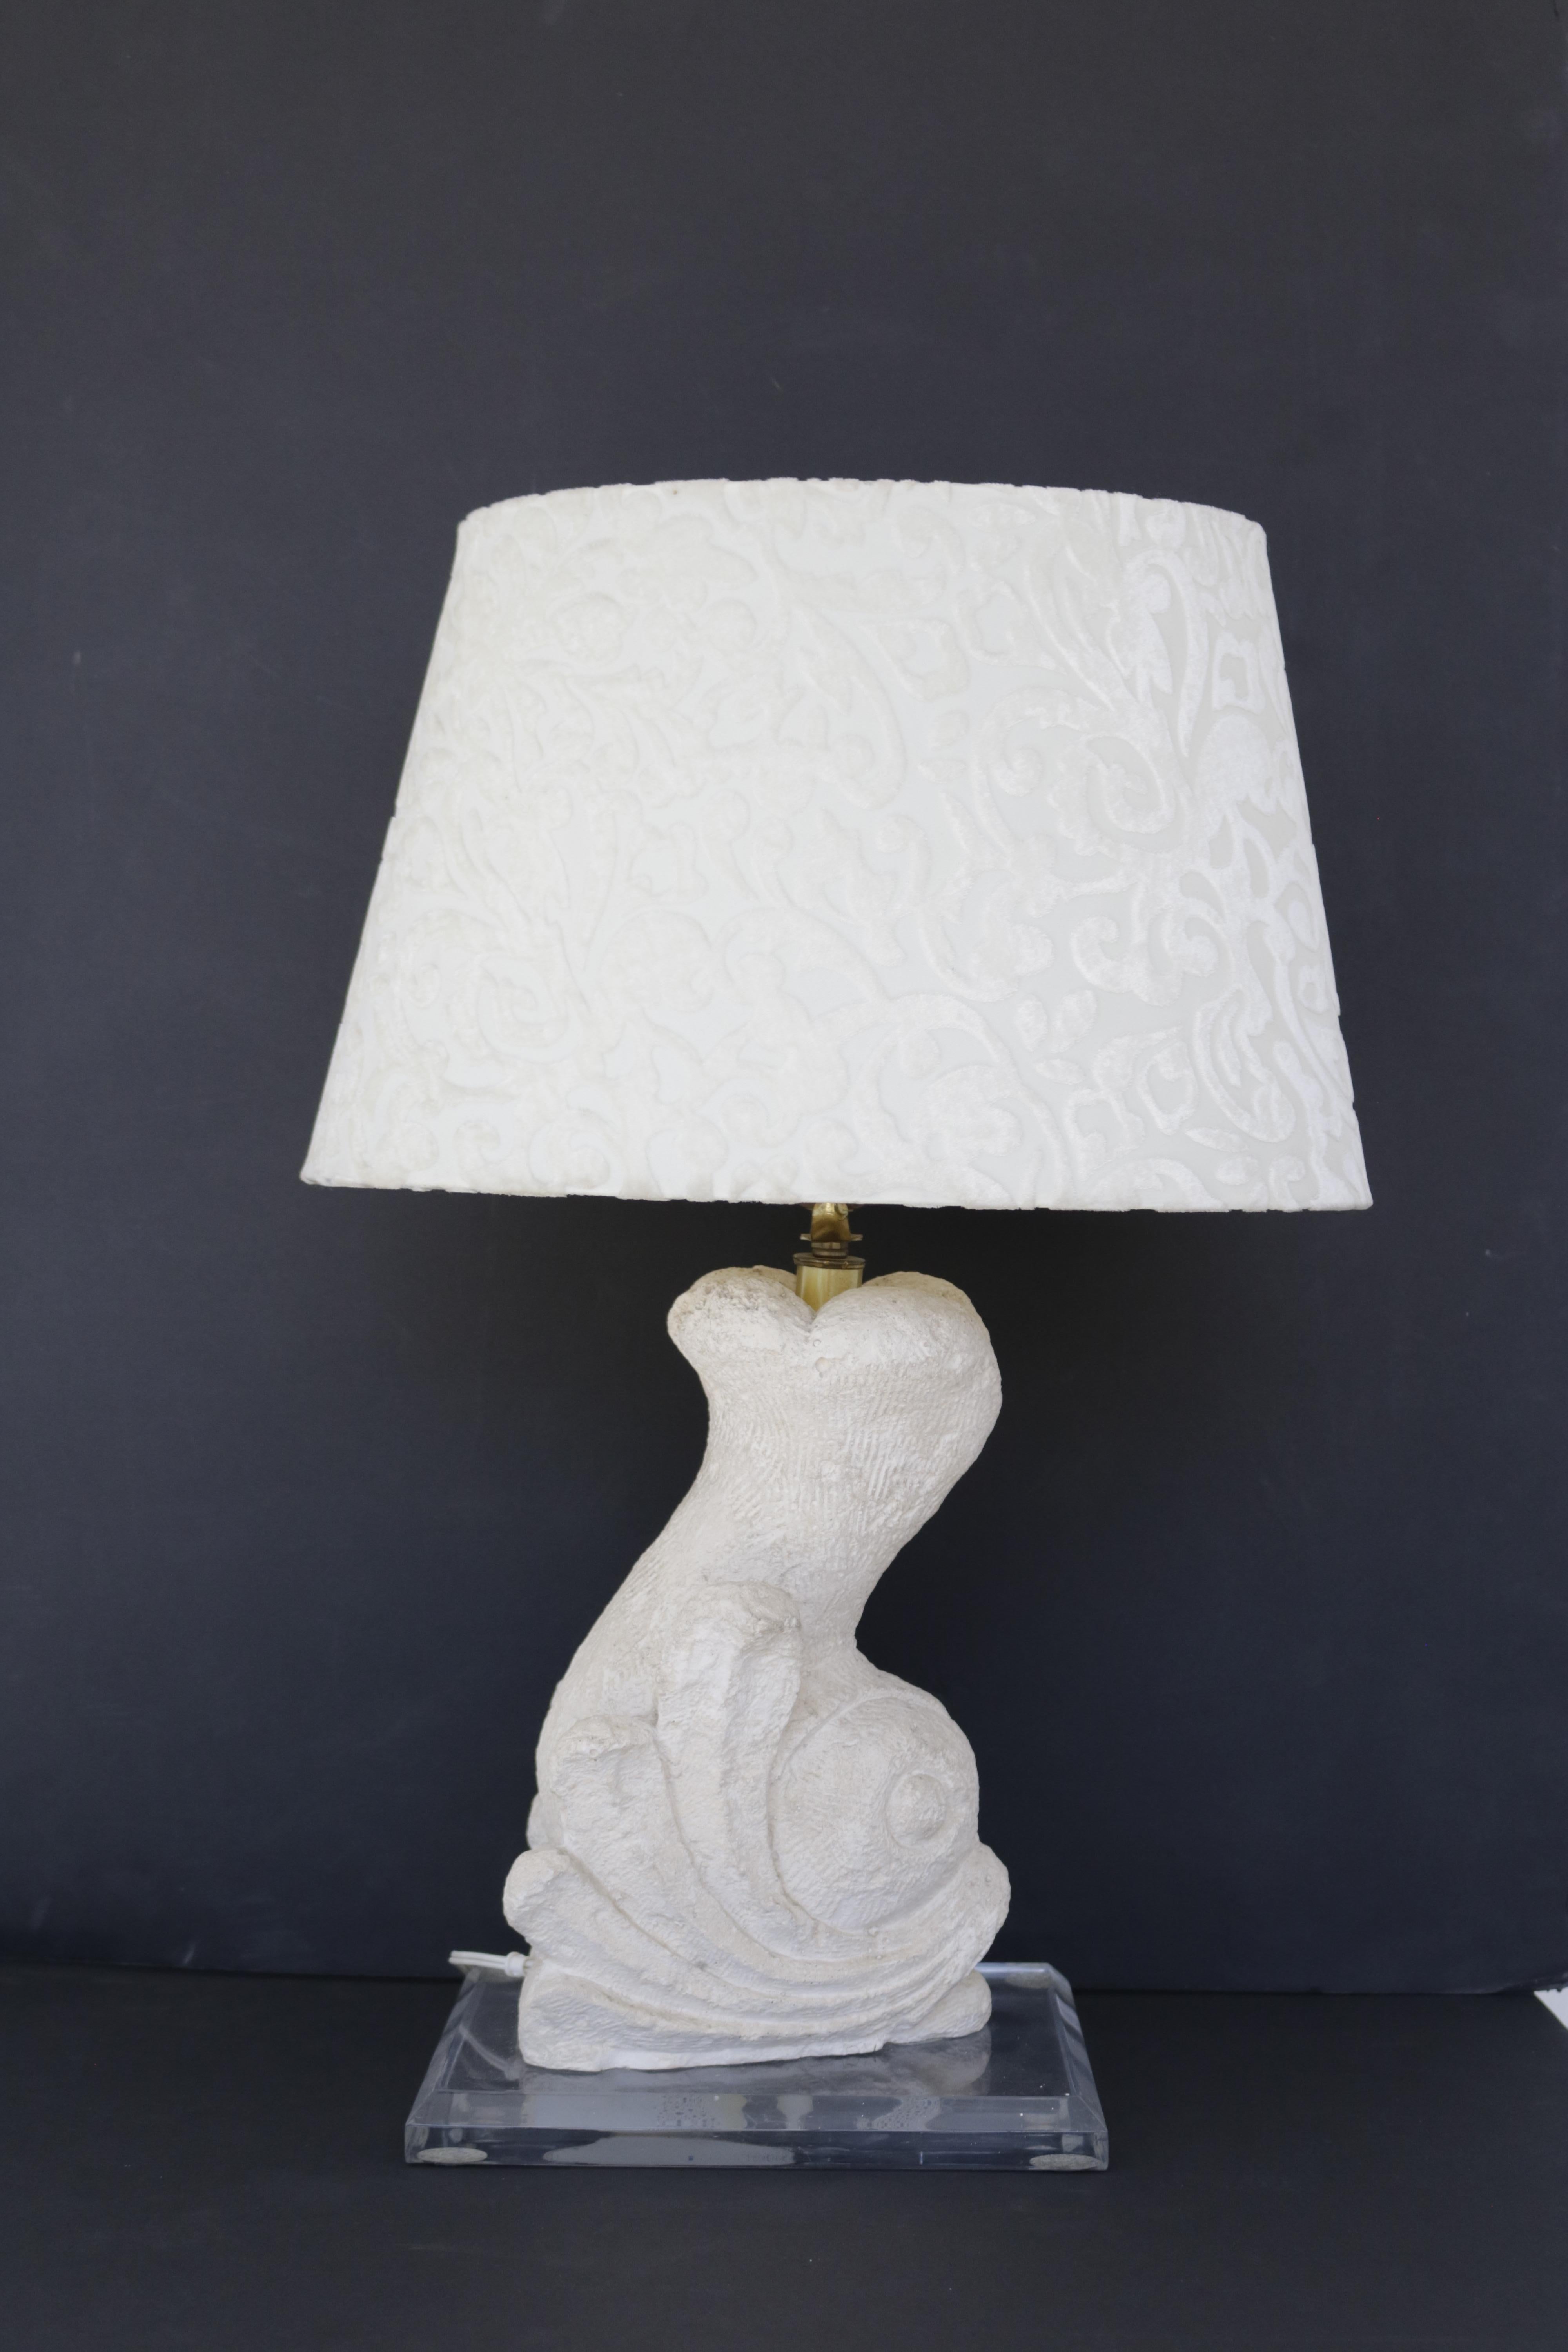 Many interesting textures with this beautifully carved stone lamp, in the shape of a dolphin. Lamp is on a Plexi-glass base and has a cream baroque patterned velvet lampshade.

Measurements:
24